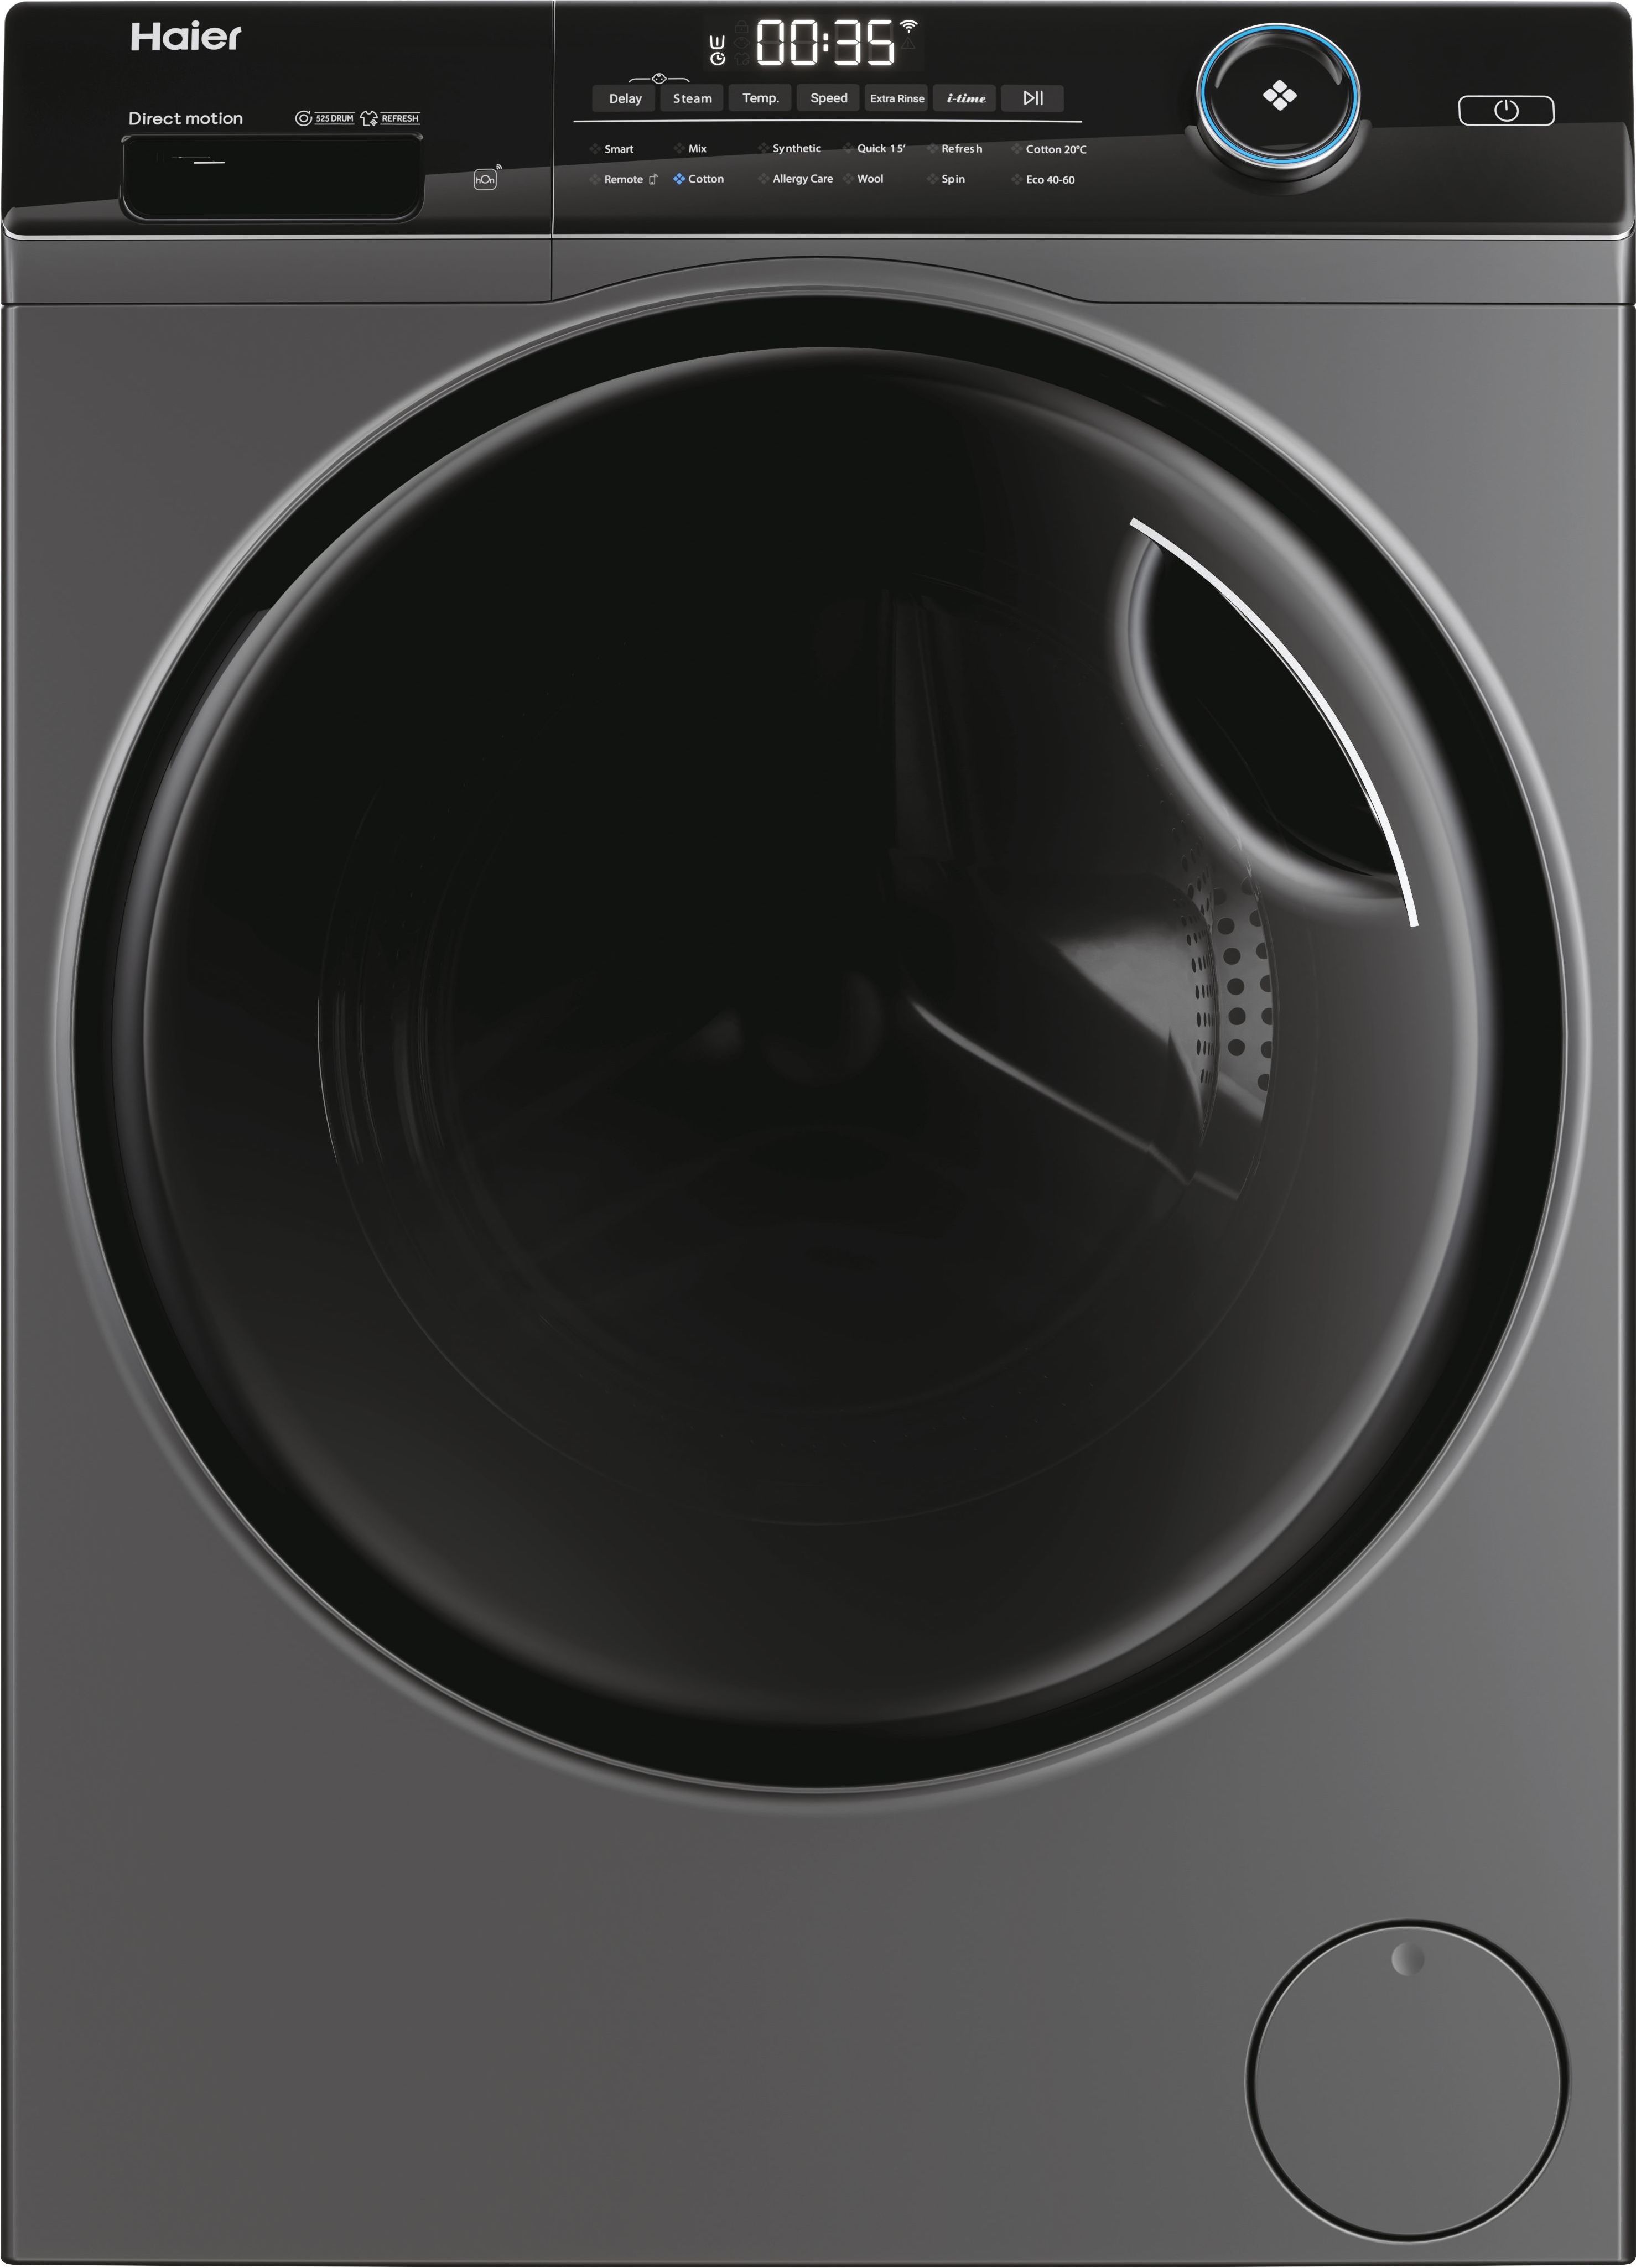 Haier i-Pro Series 5 HW80-B14959S8TU1 8kg Washing Machine with 1400 rpm - Anthracite - A Rated, Black